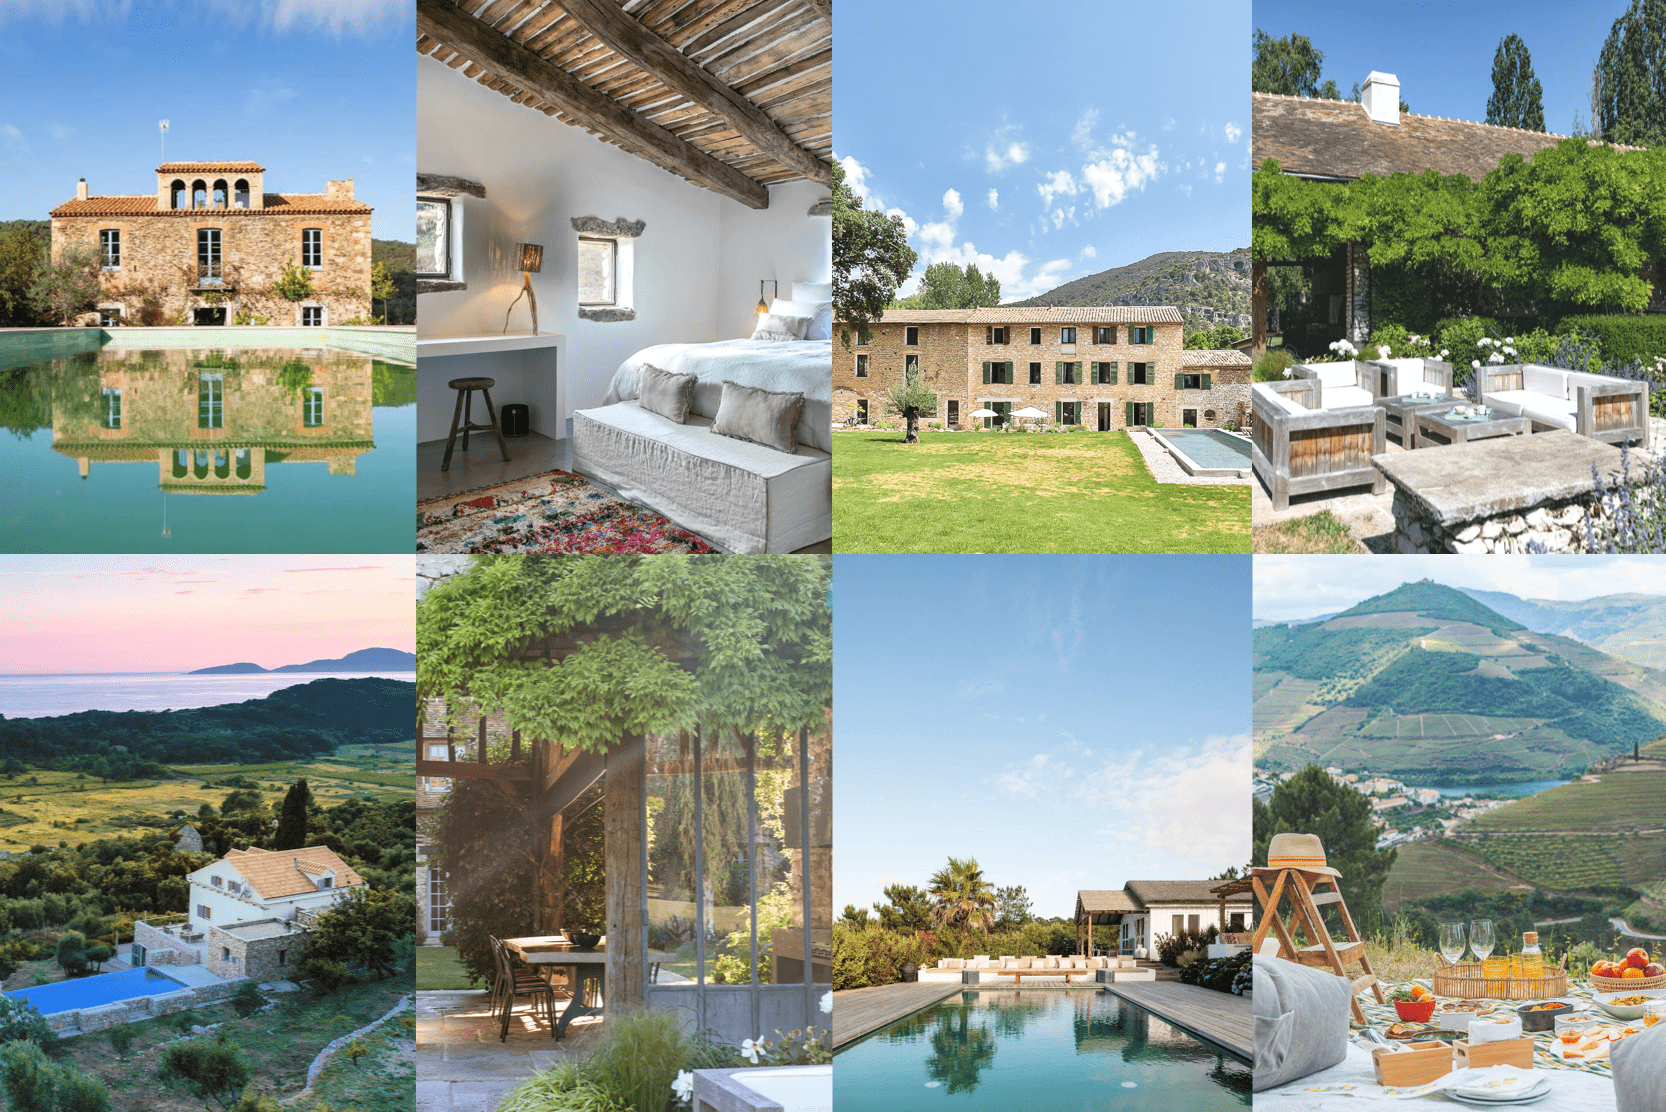 The Most Beautiful Country Homes in the World: According to Le Collectionist